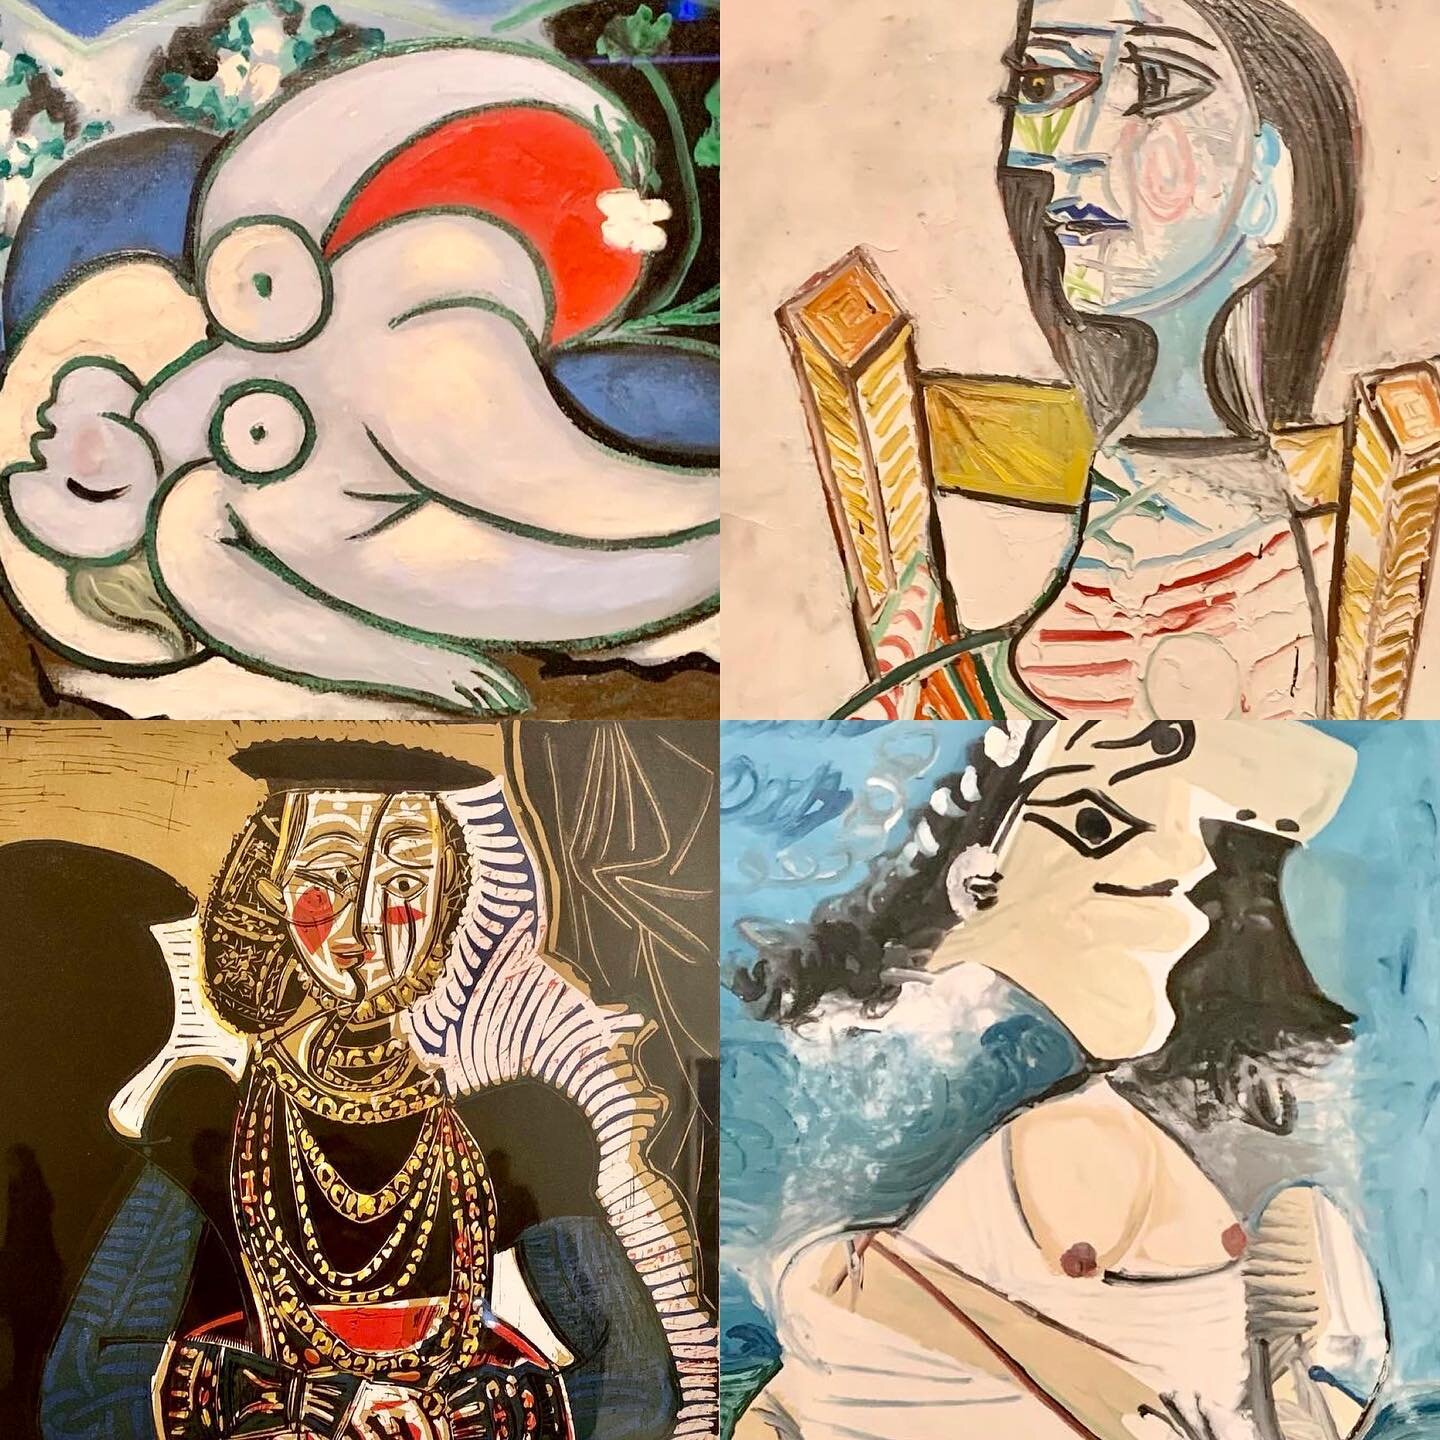 Enjoyed spending the morning being inspired and curious with Vickie from @the.curious.rabbit at @ngvmelbourne, seeing the Picasso exhibition.
.
&lsquo;Good taste is the enemy of creativity.&rsquo; Pablo Picasso
.
#picassongv #pablopicasso #creativity